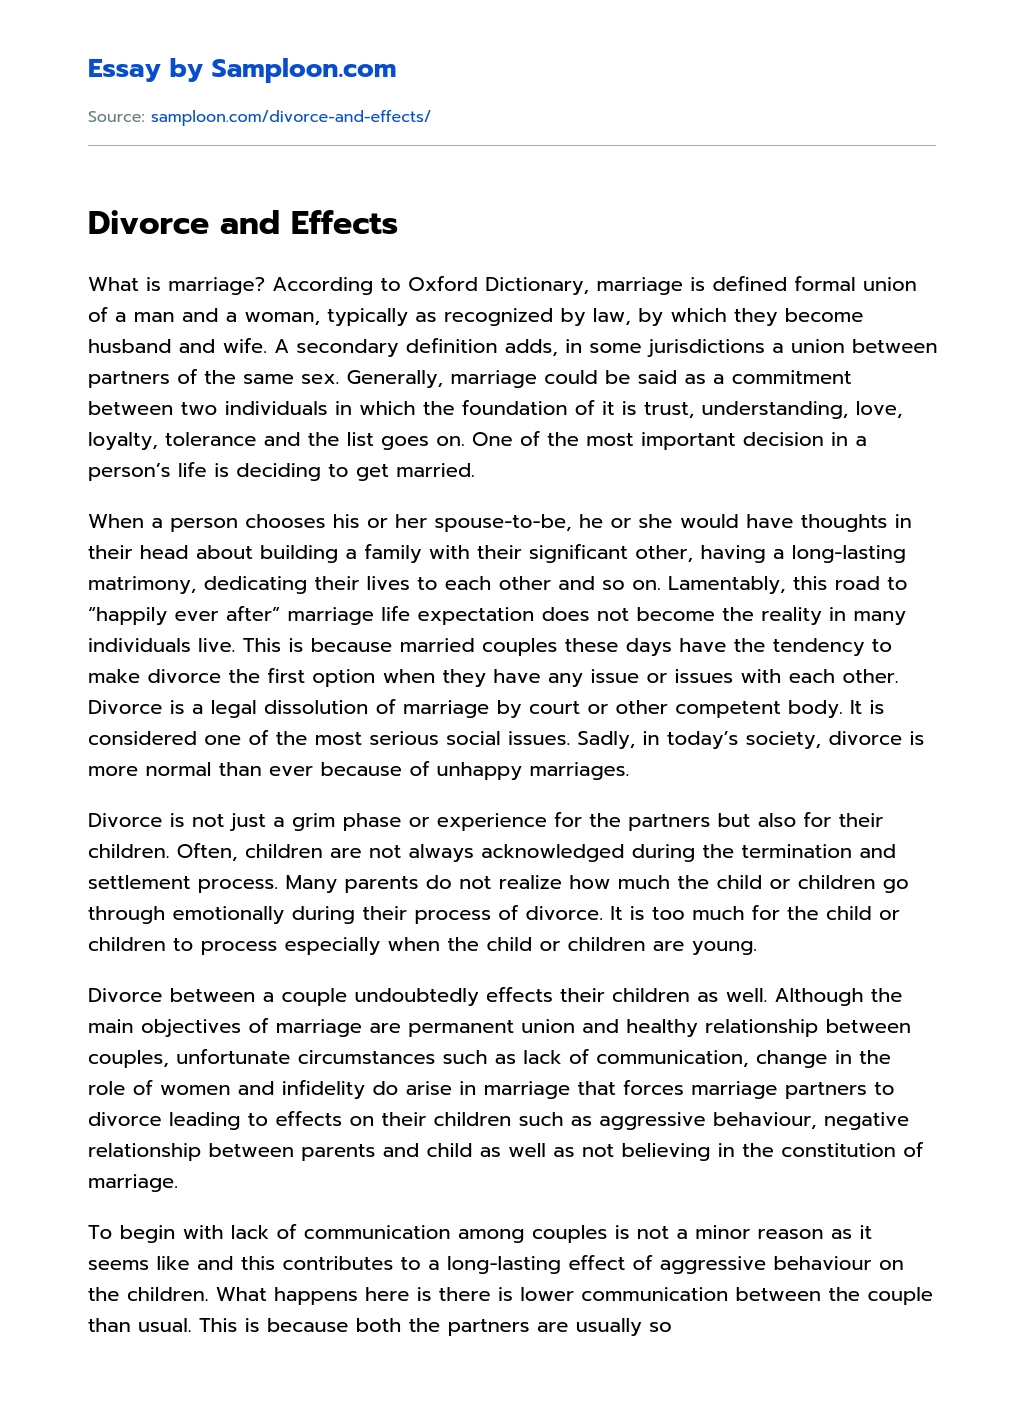 Divorce and Effects Cause And Effect Essay essay